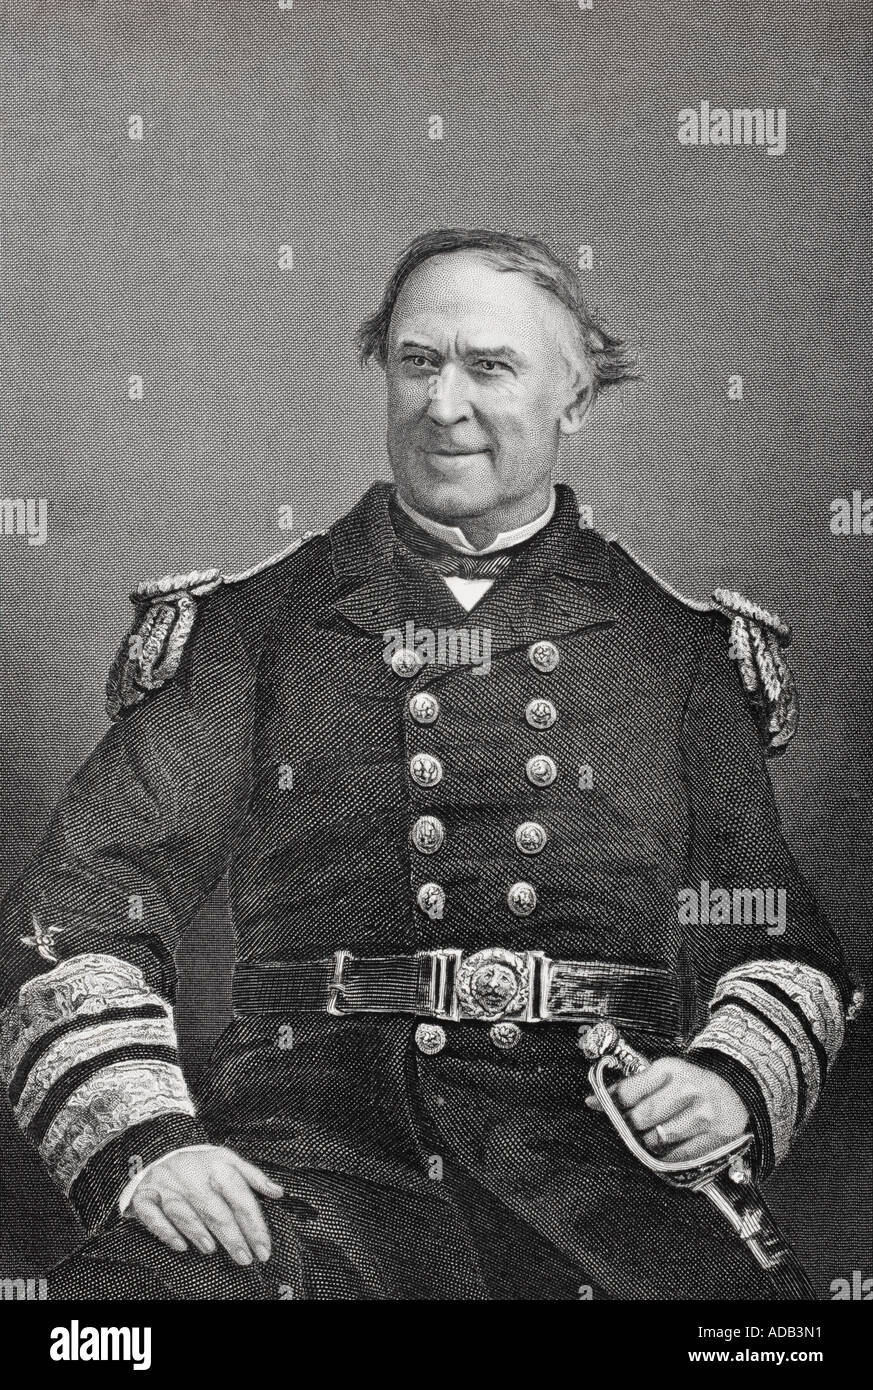 David Glascoe Farragut, 1801 - 1870. American admiral on Union side during Civil War. From the last photograph taken of him. Stock Photo